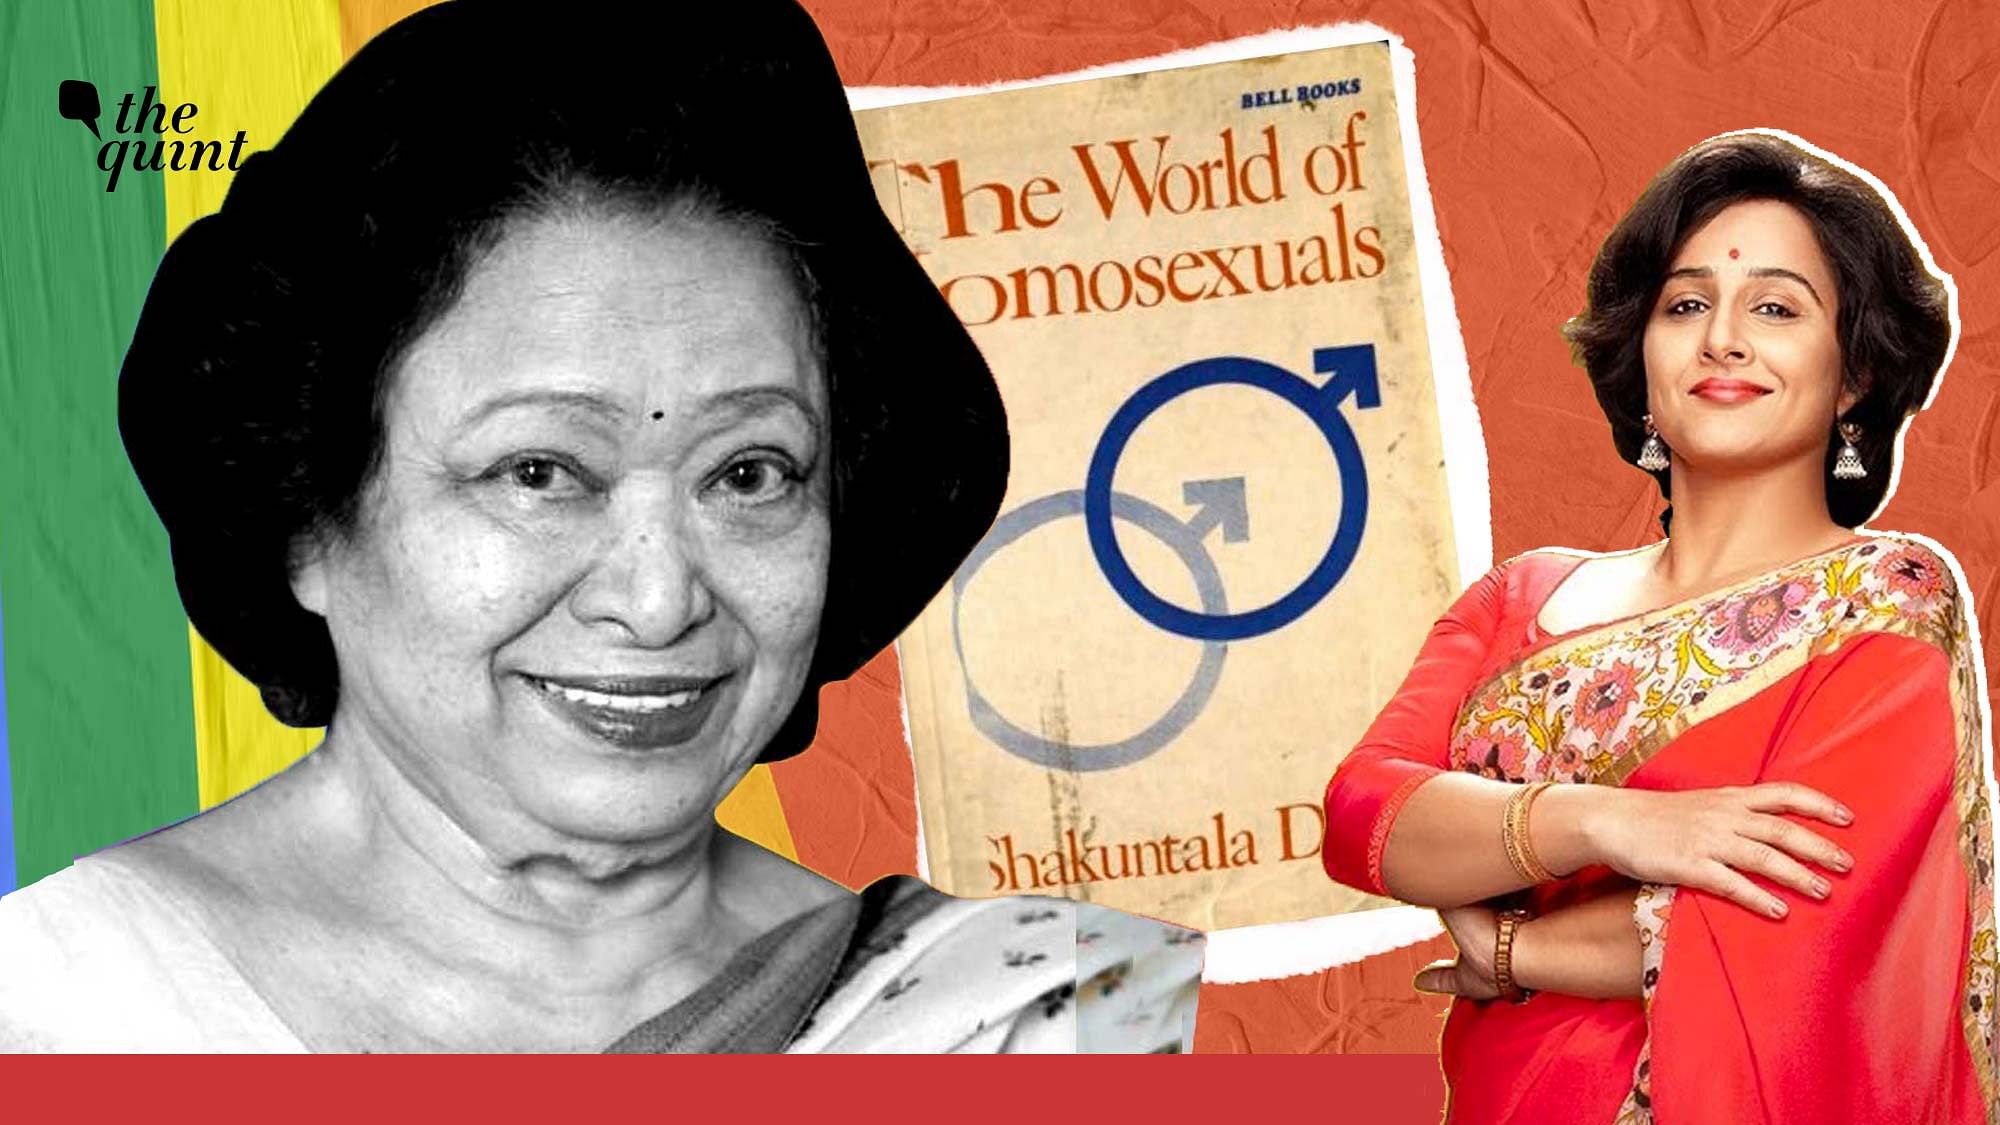 Did you know Shakuntala Devi gave India one of its first books on homosexuality?